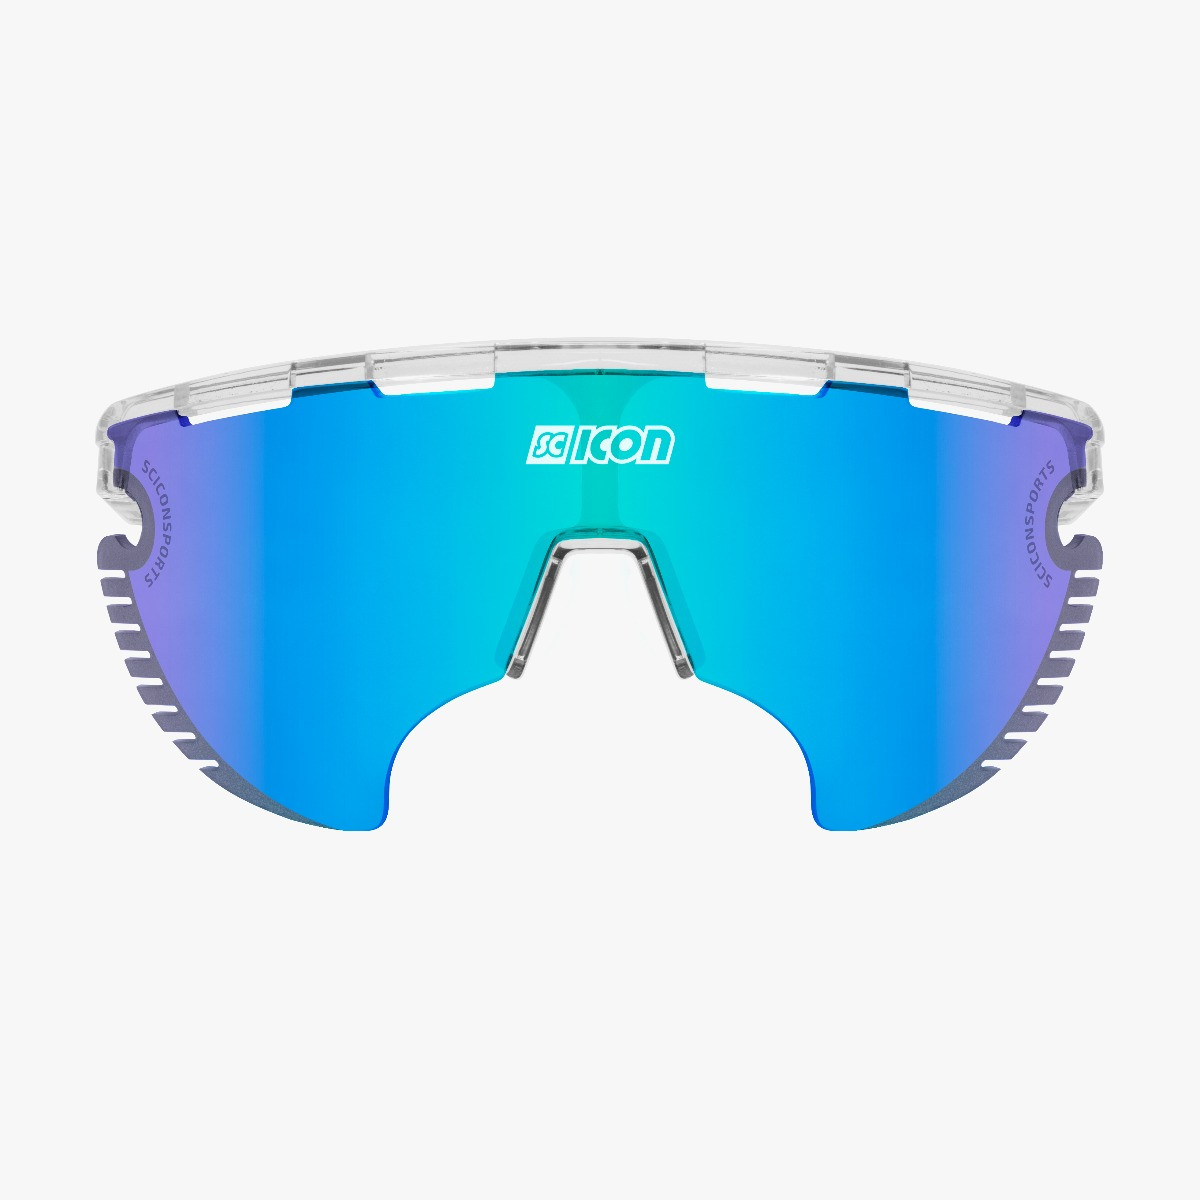 Scicon Sports | Aerowing Lamon Sport Performance Sunglasses - Crystal Gloss / Multimirror Blue - EY30030700